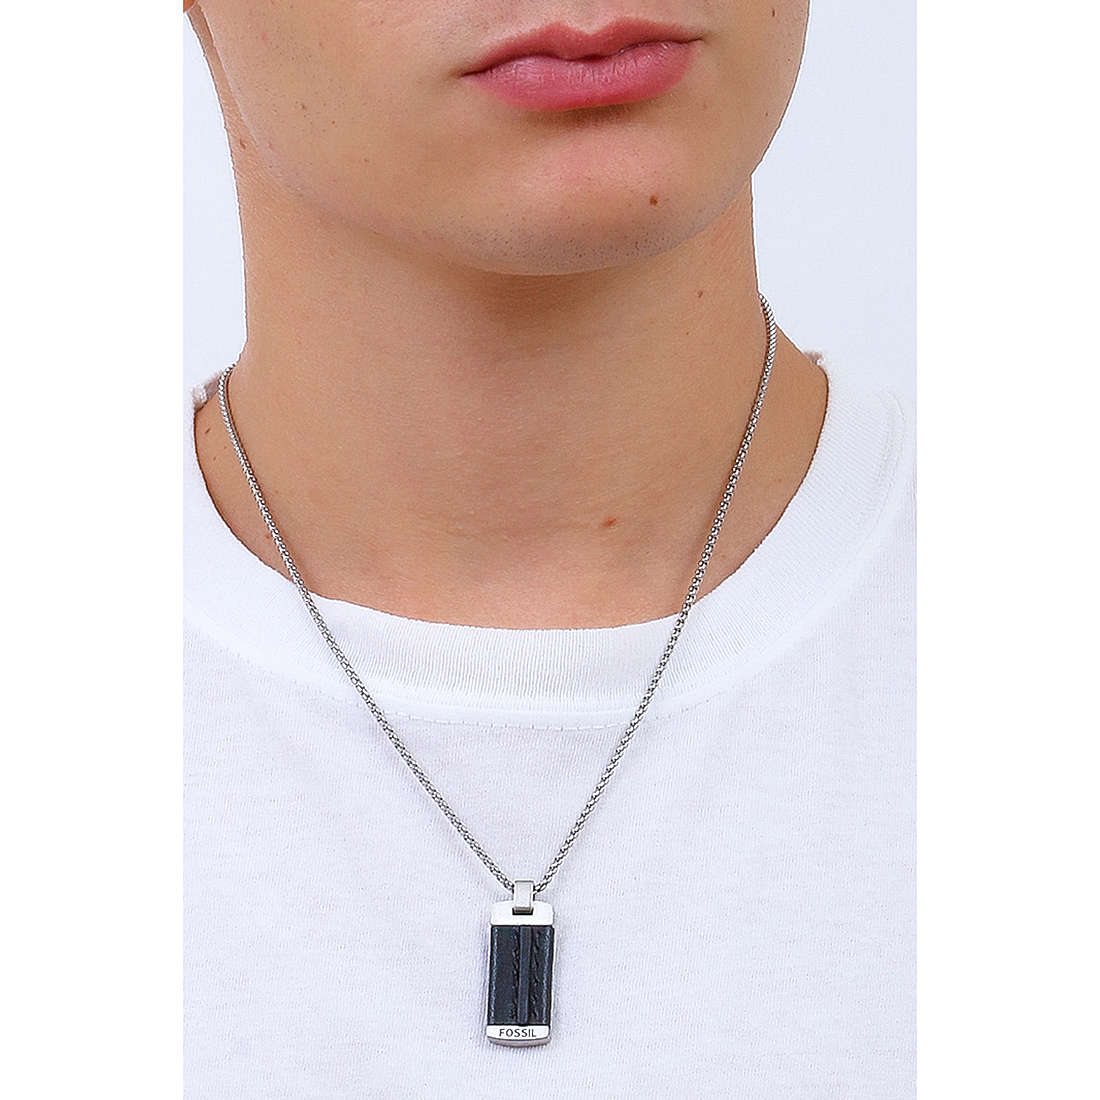 Fossil necklaces Dress man JF03725040 wearing